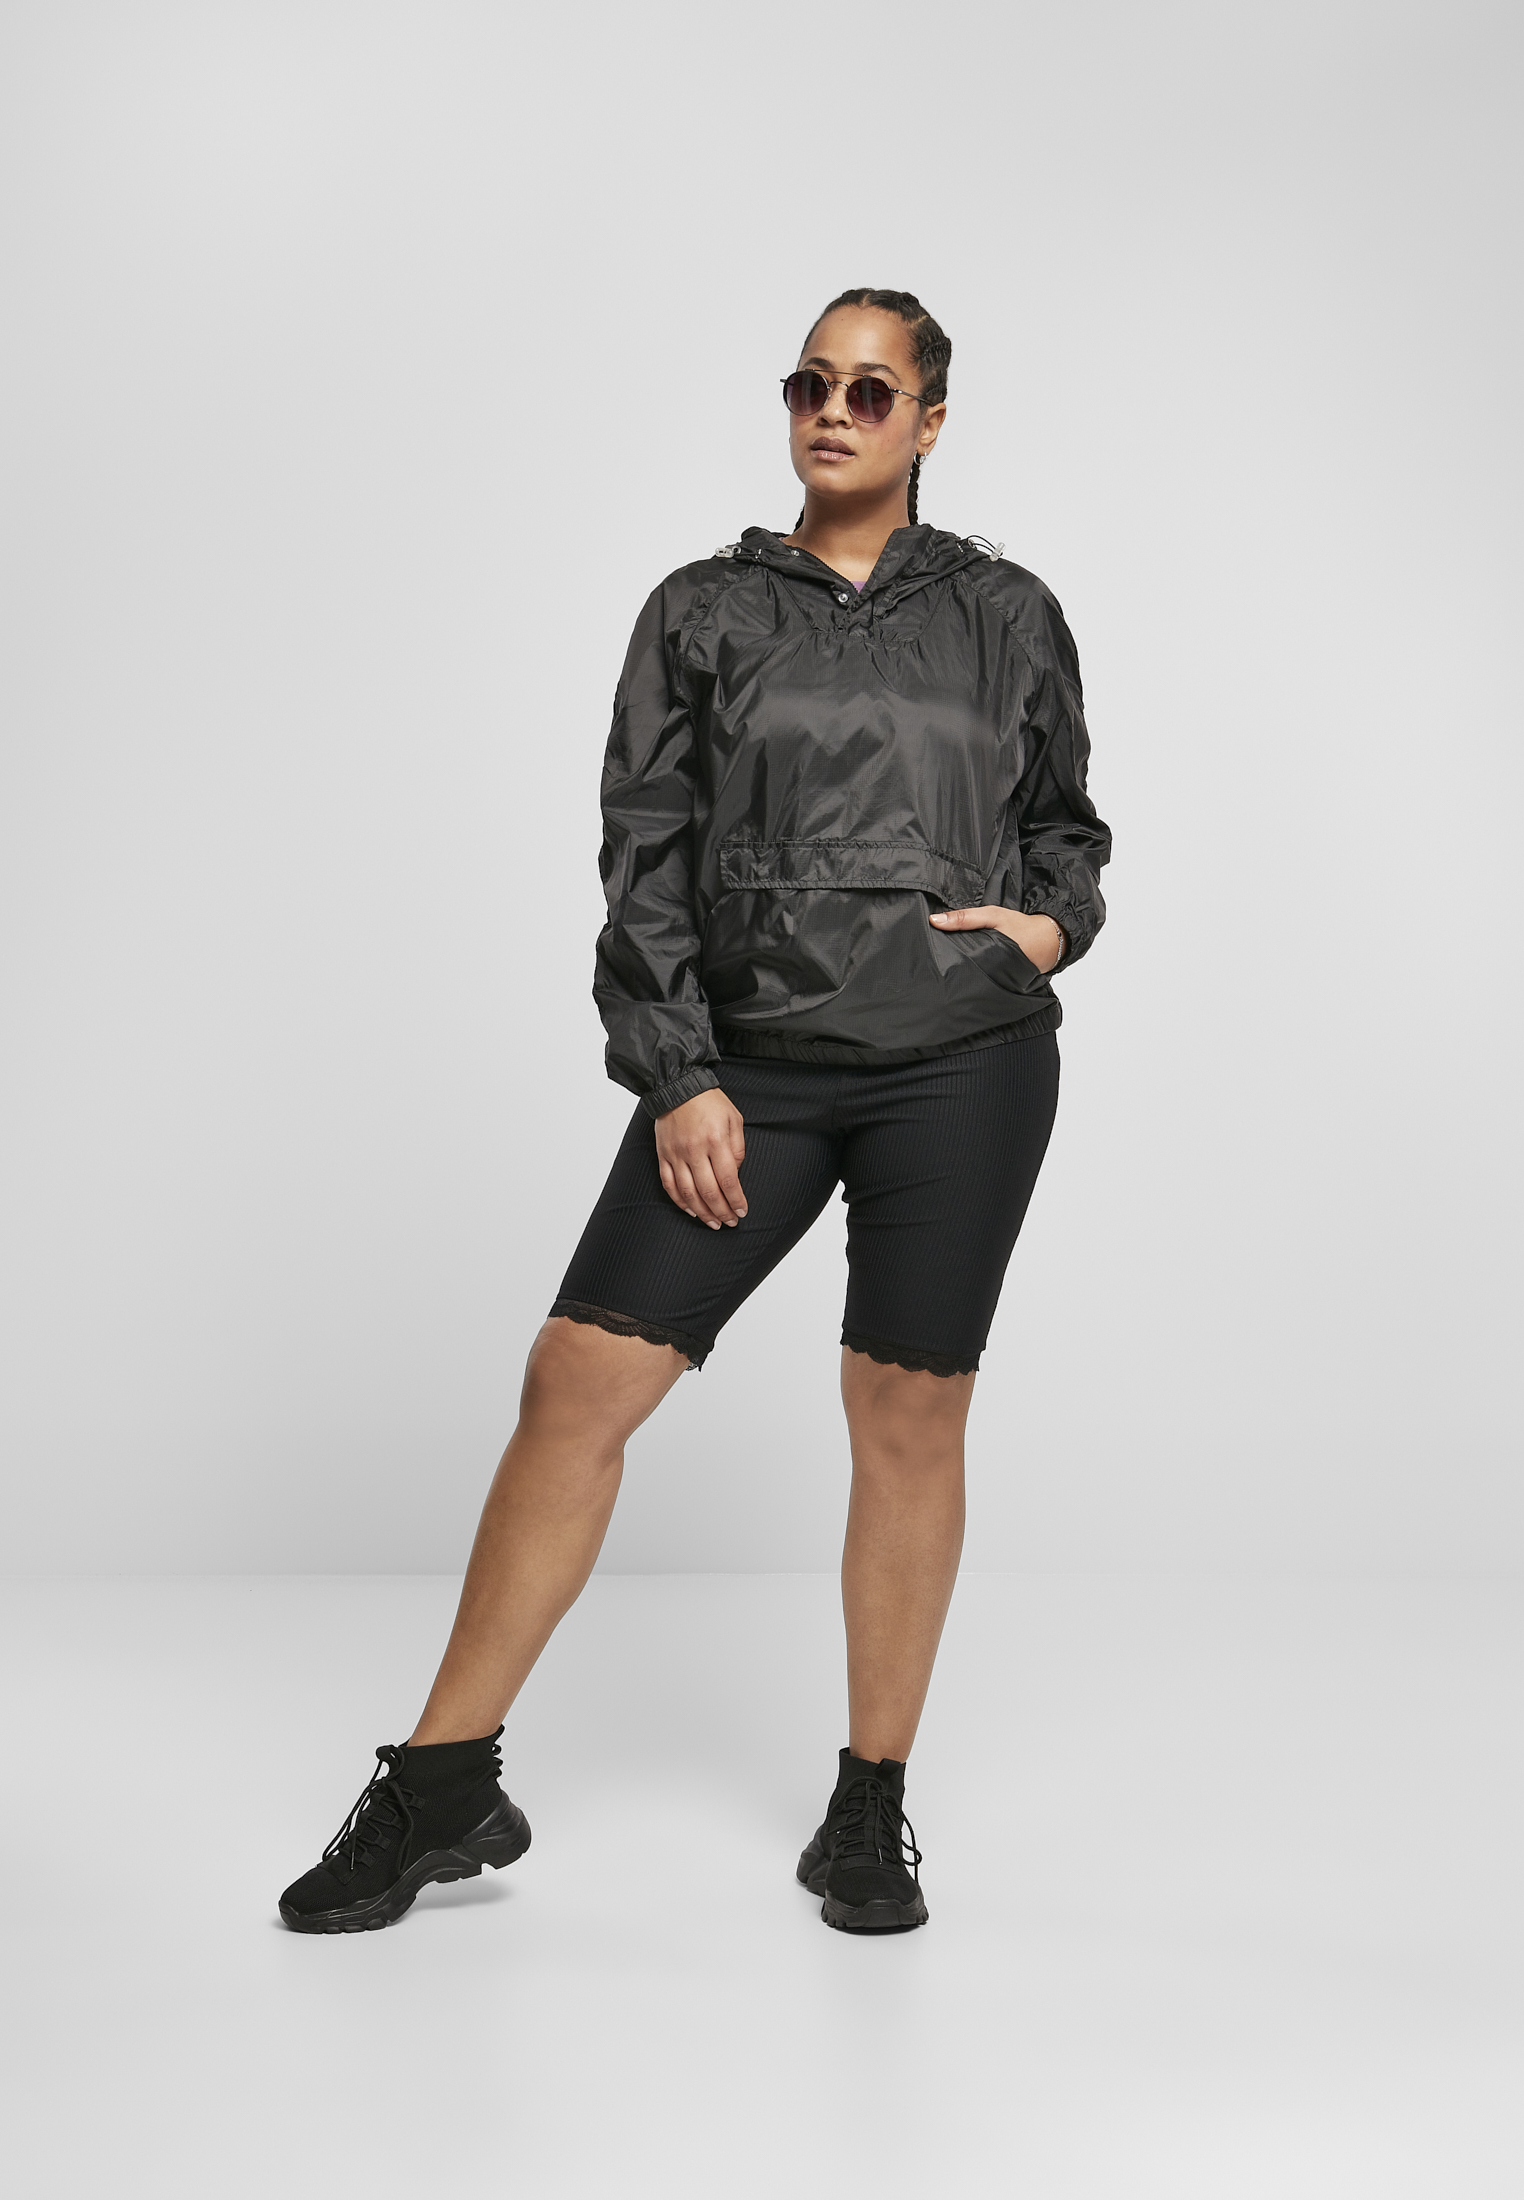 Light Jackets Ladies Transparent Light Pull Over Jacket in Farbe black